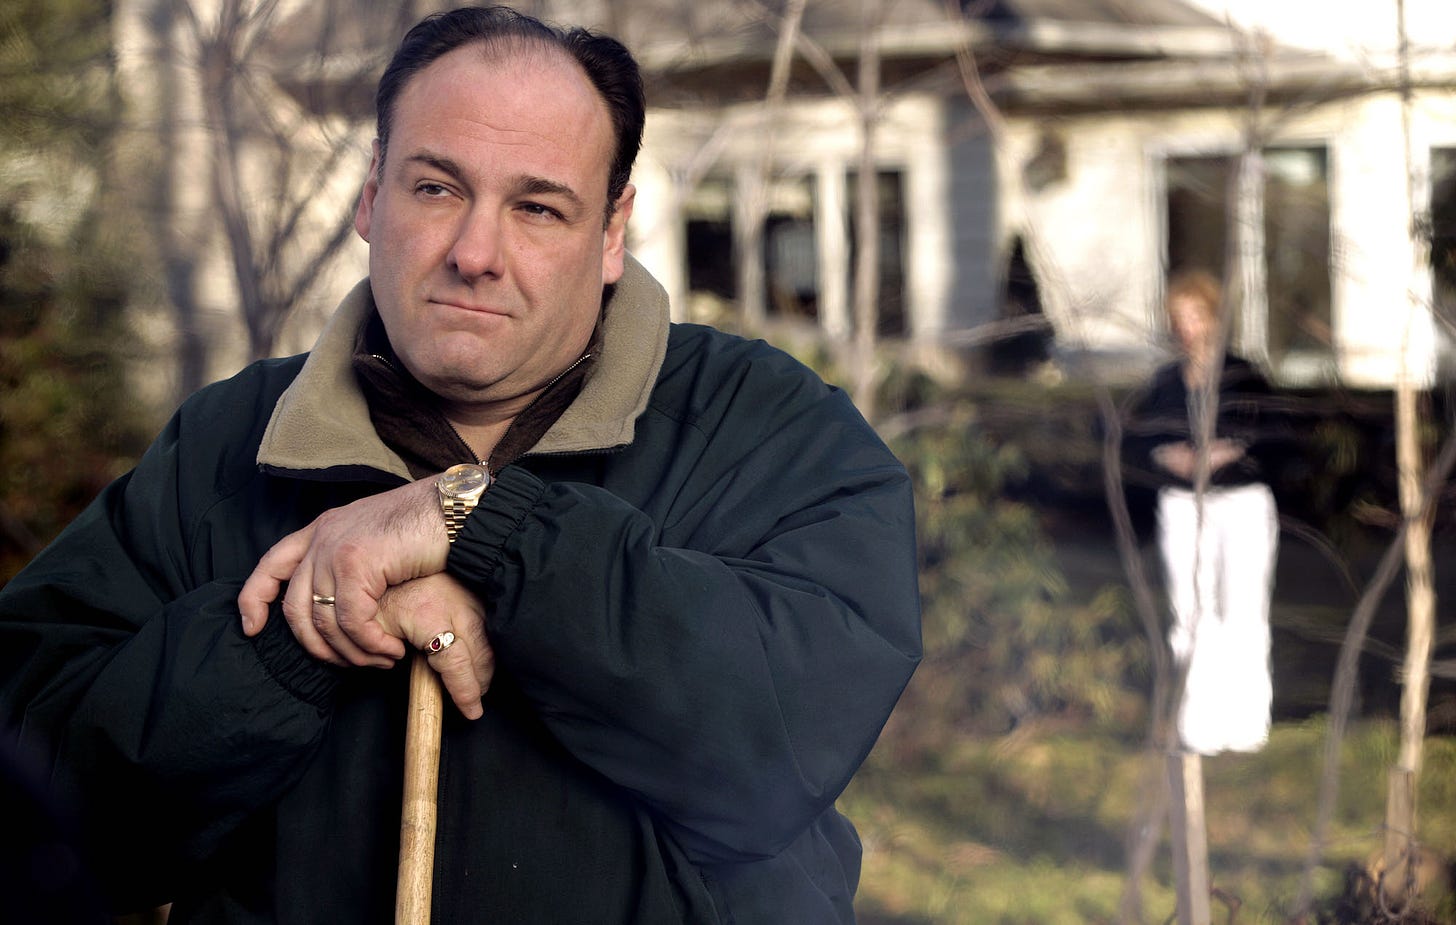 The Sopranos' fans are being invited to the home of Tony Soprano